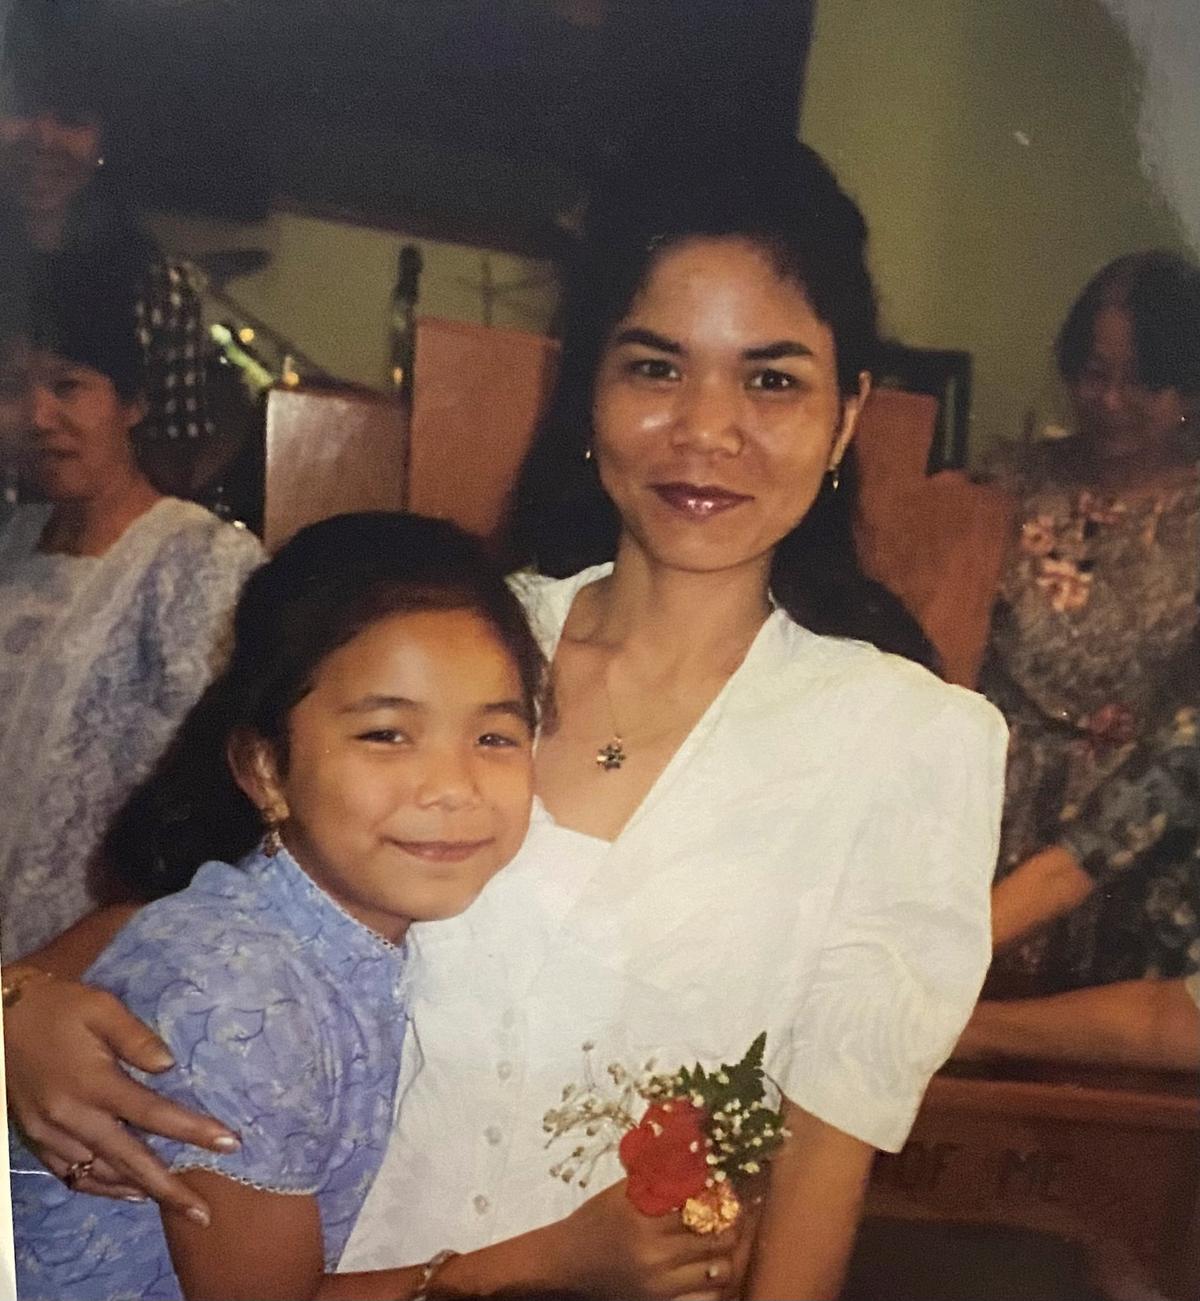 Mrs. Shanley, aged 10, and her mom at church on Mother’s Day. (Courtesy of Debora Shanley)